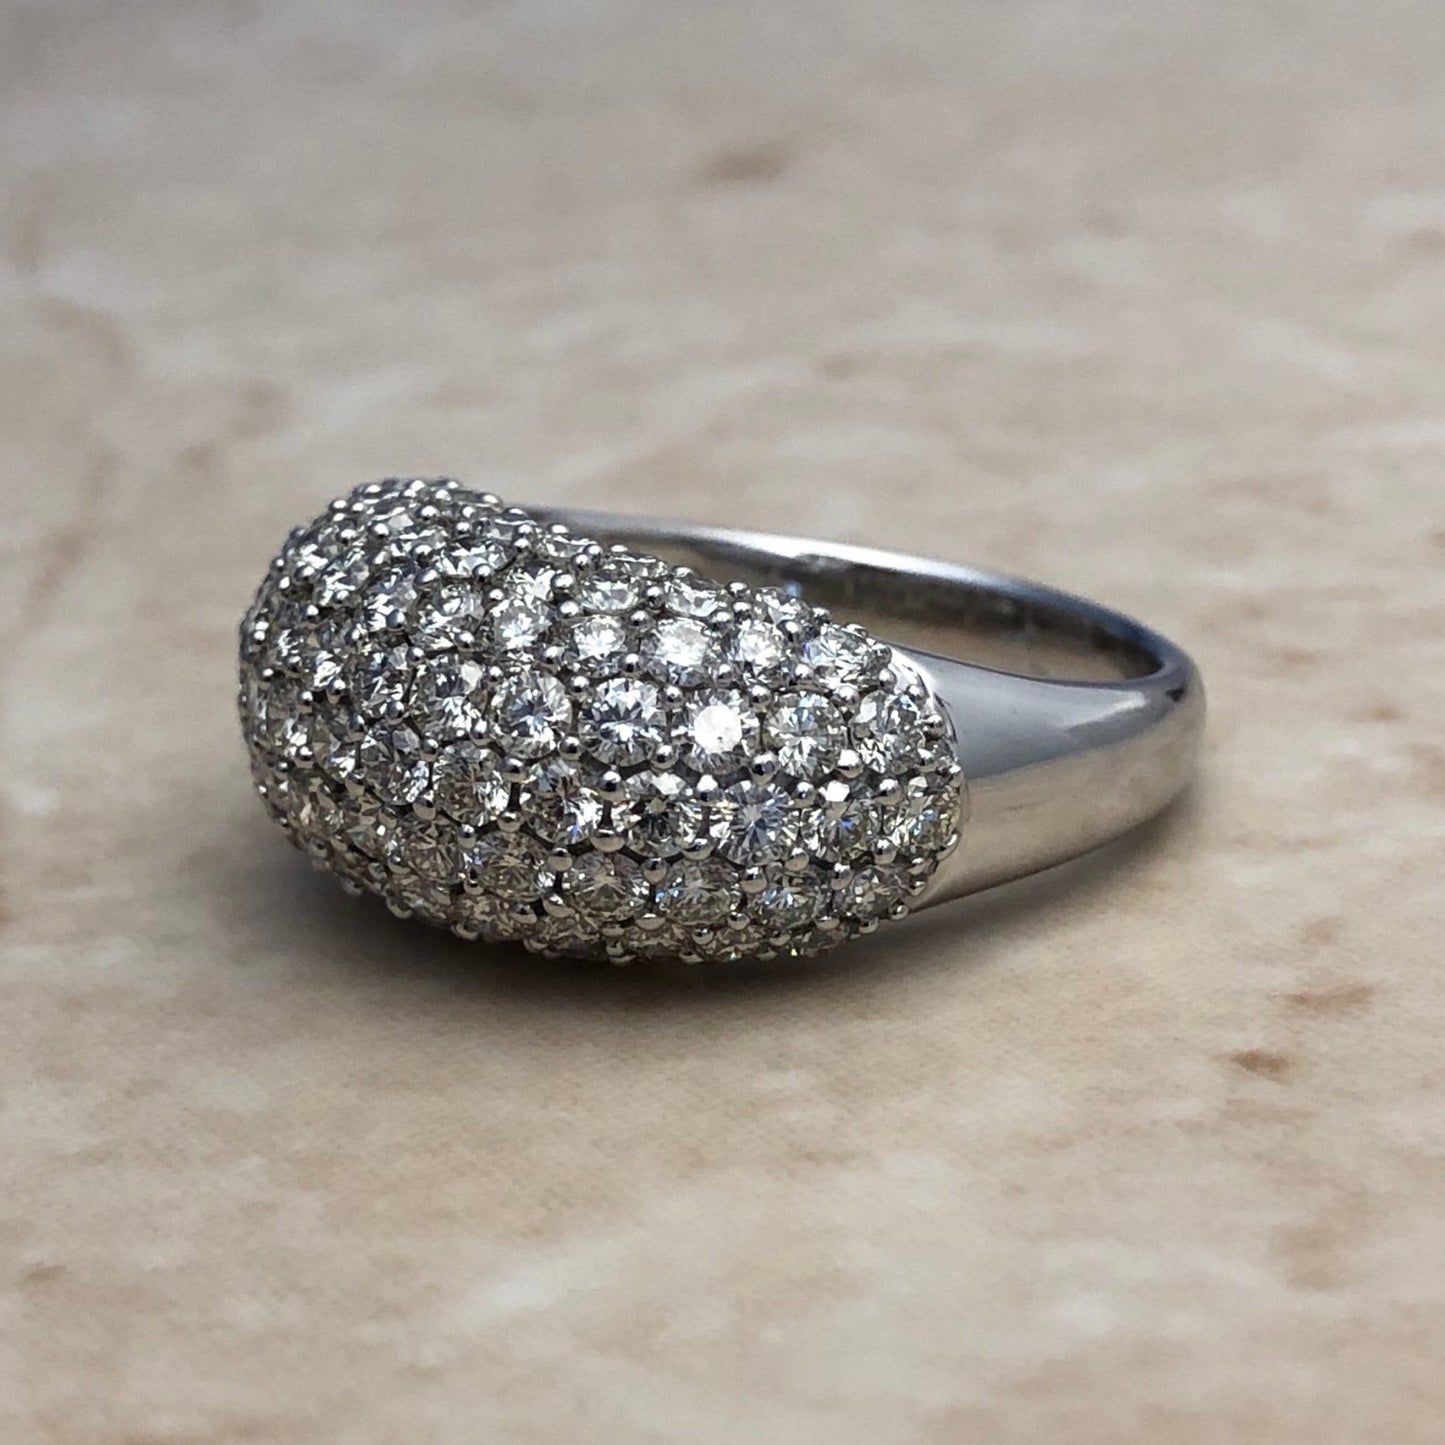 Fine Pave Diamond Dome Ring 3.19 CTTW - 18K White Gold - Diamond Cocktail Ring - Size 6.75 US